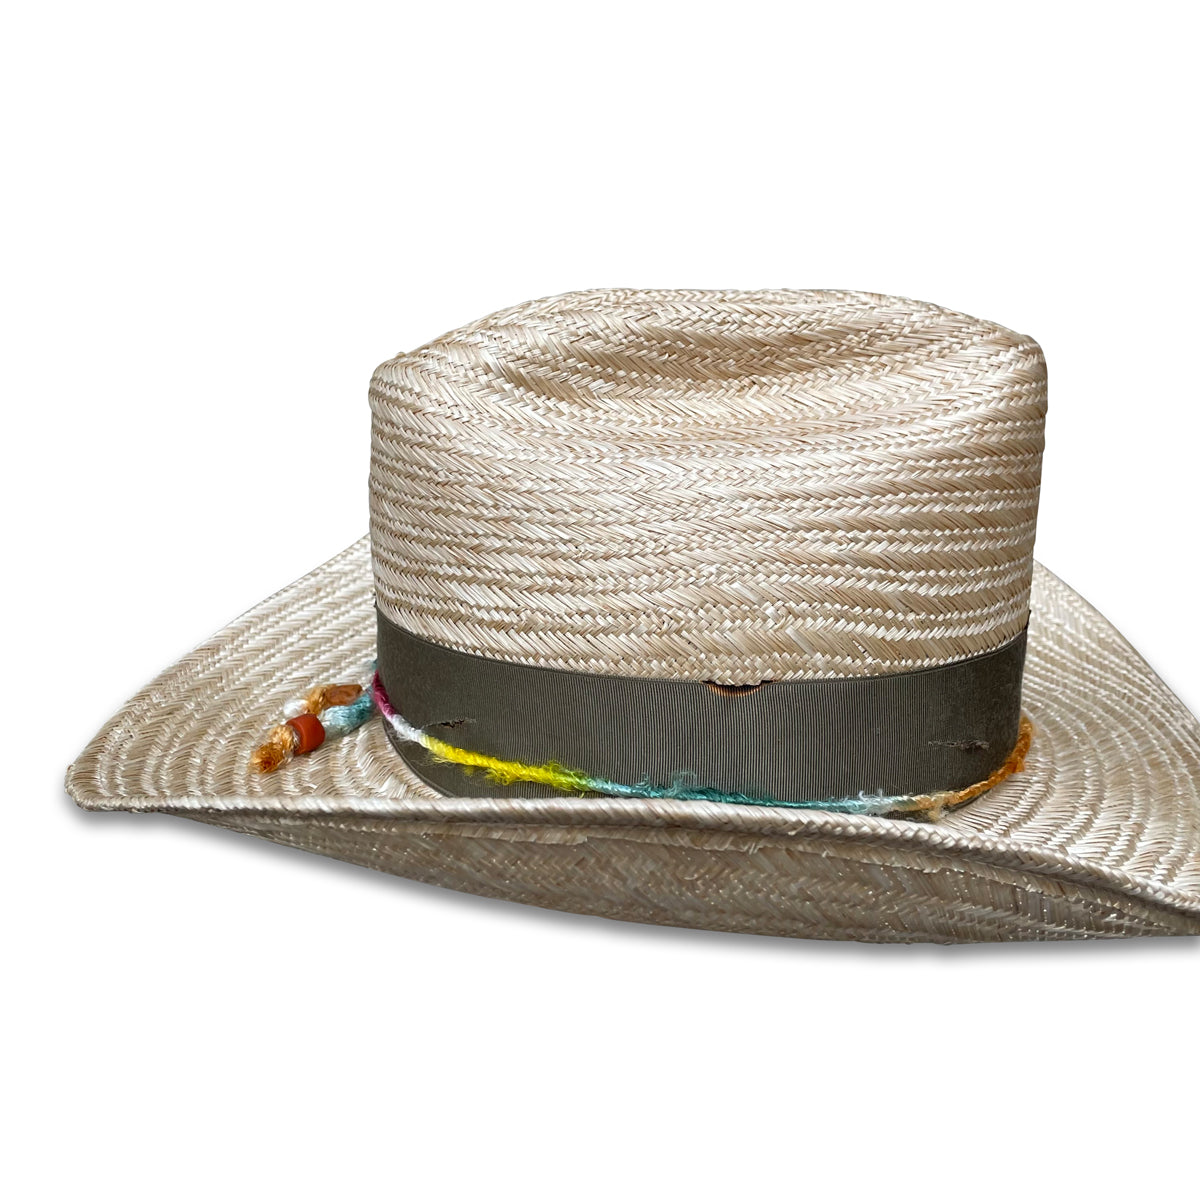 Detailed image of a handwoven sisol straw cowboy hat adorned with a multicolored silk yarn and a grosgrain ribbon. A sustainably sourced turkey feather from Vermont decorates the hat.